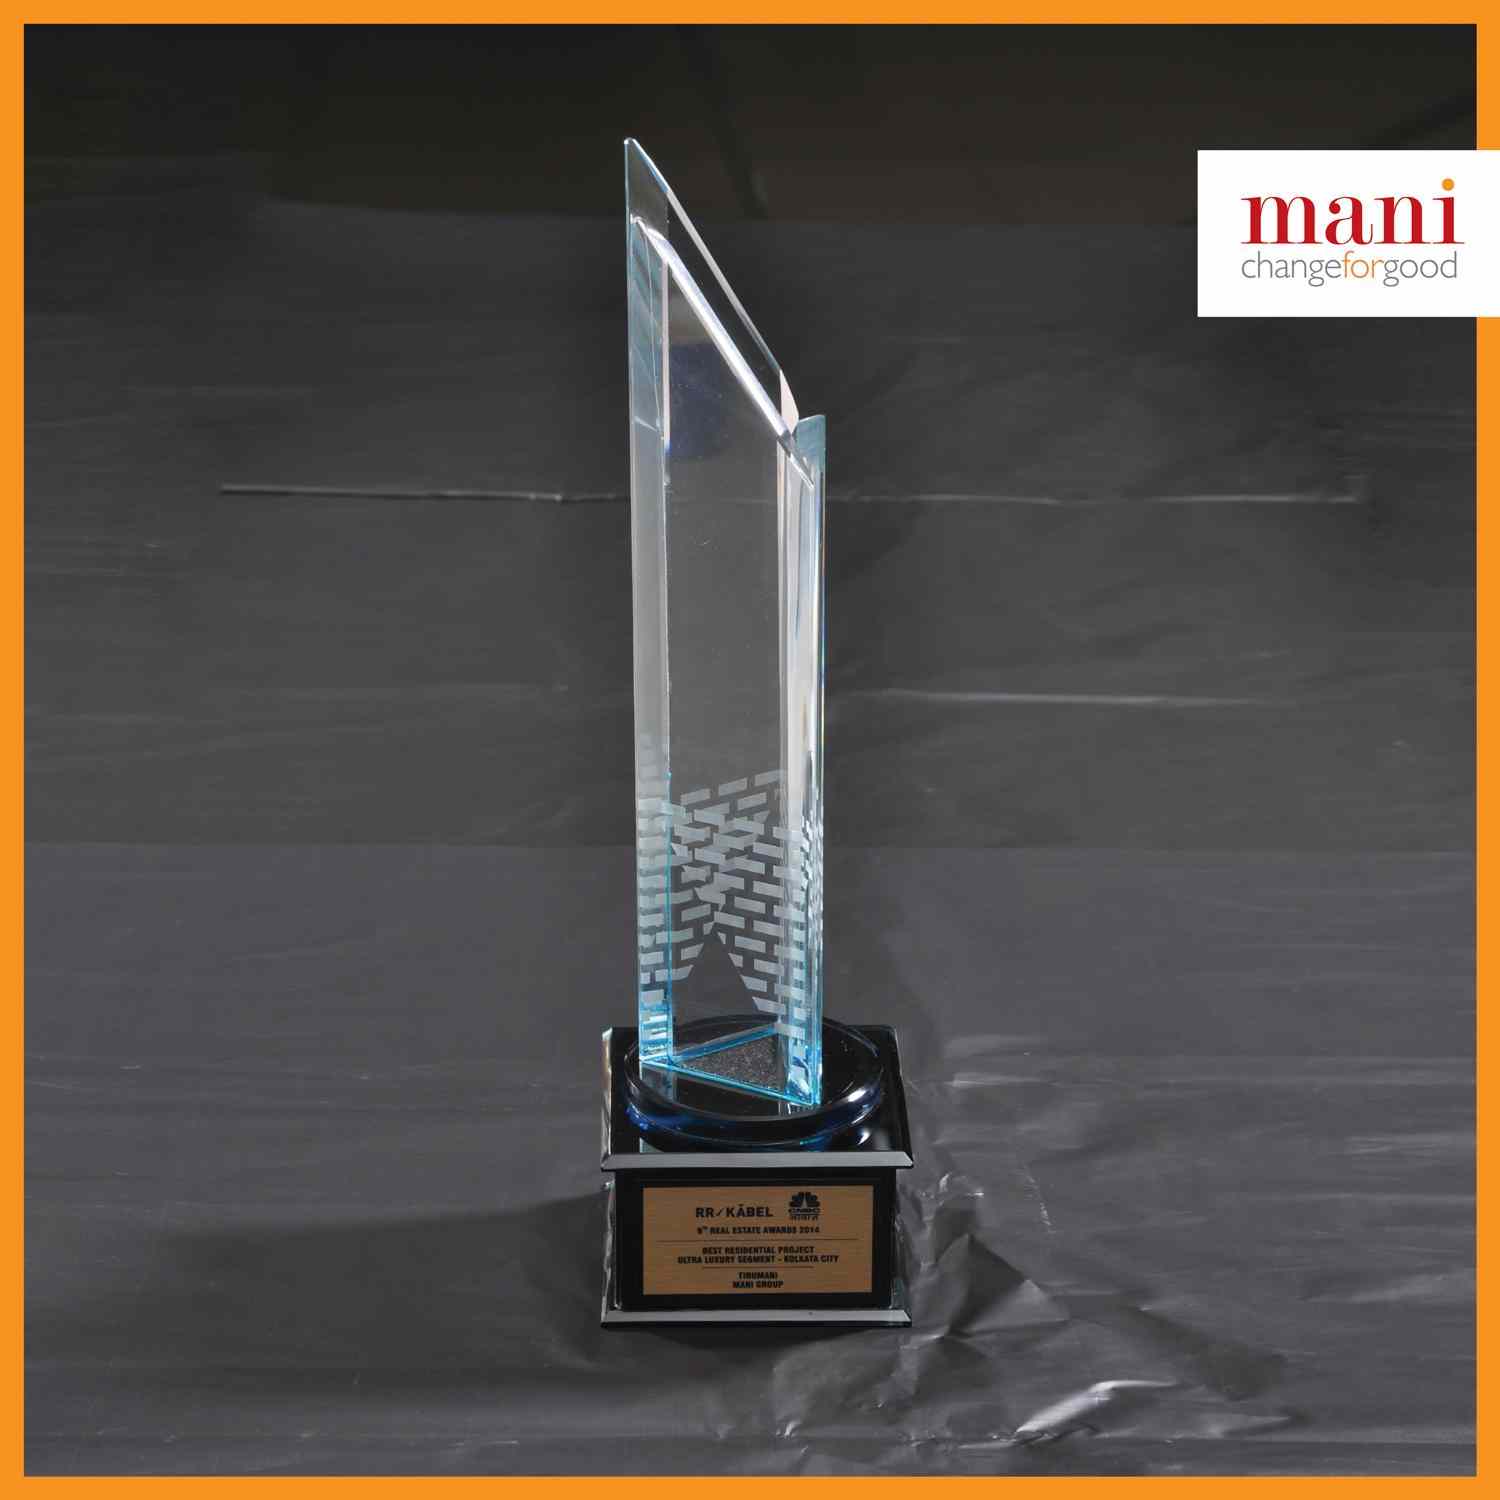 Swarnamani awarded Best Upcoming Luxury Residential Project at CREDAI Bengal Realty Awards 2015